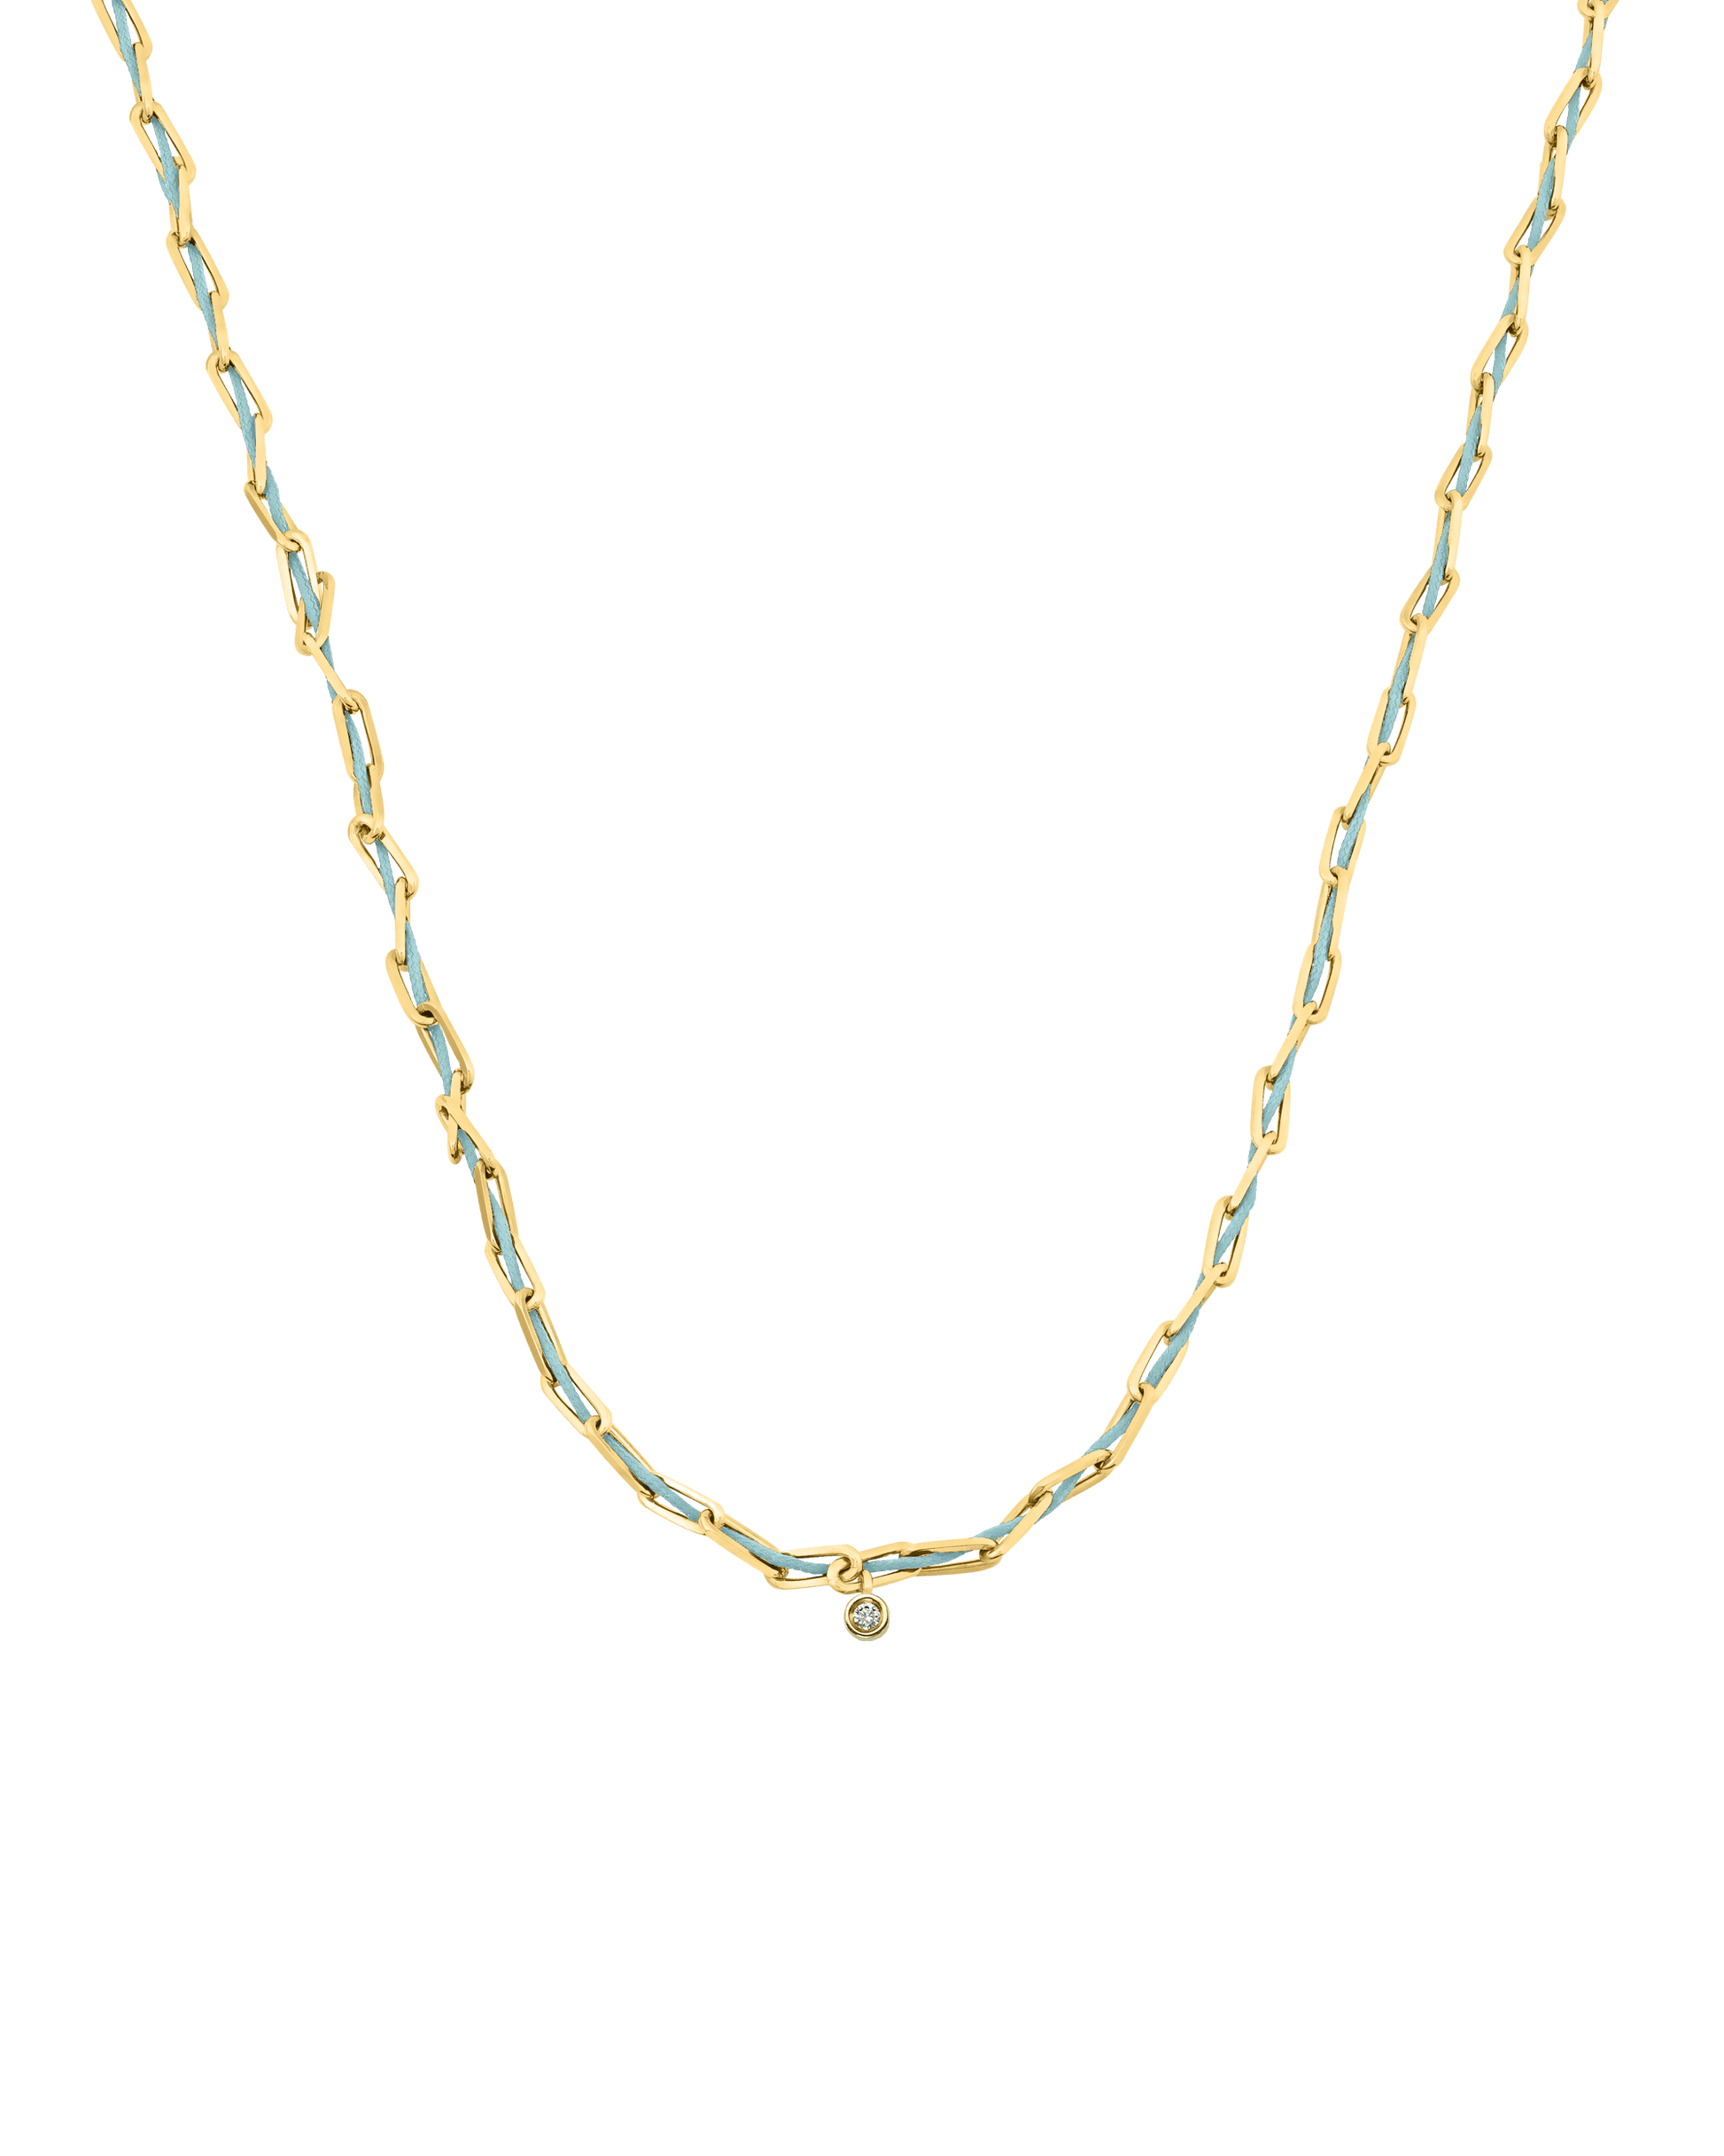 Twine Diamond Necklace - 18K Gold Vermeil Necklaces magal-dev Turquoise Small: 0.03ct 16"